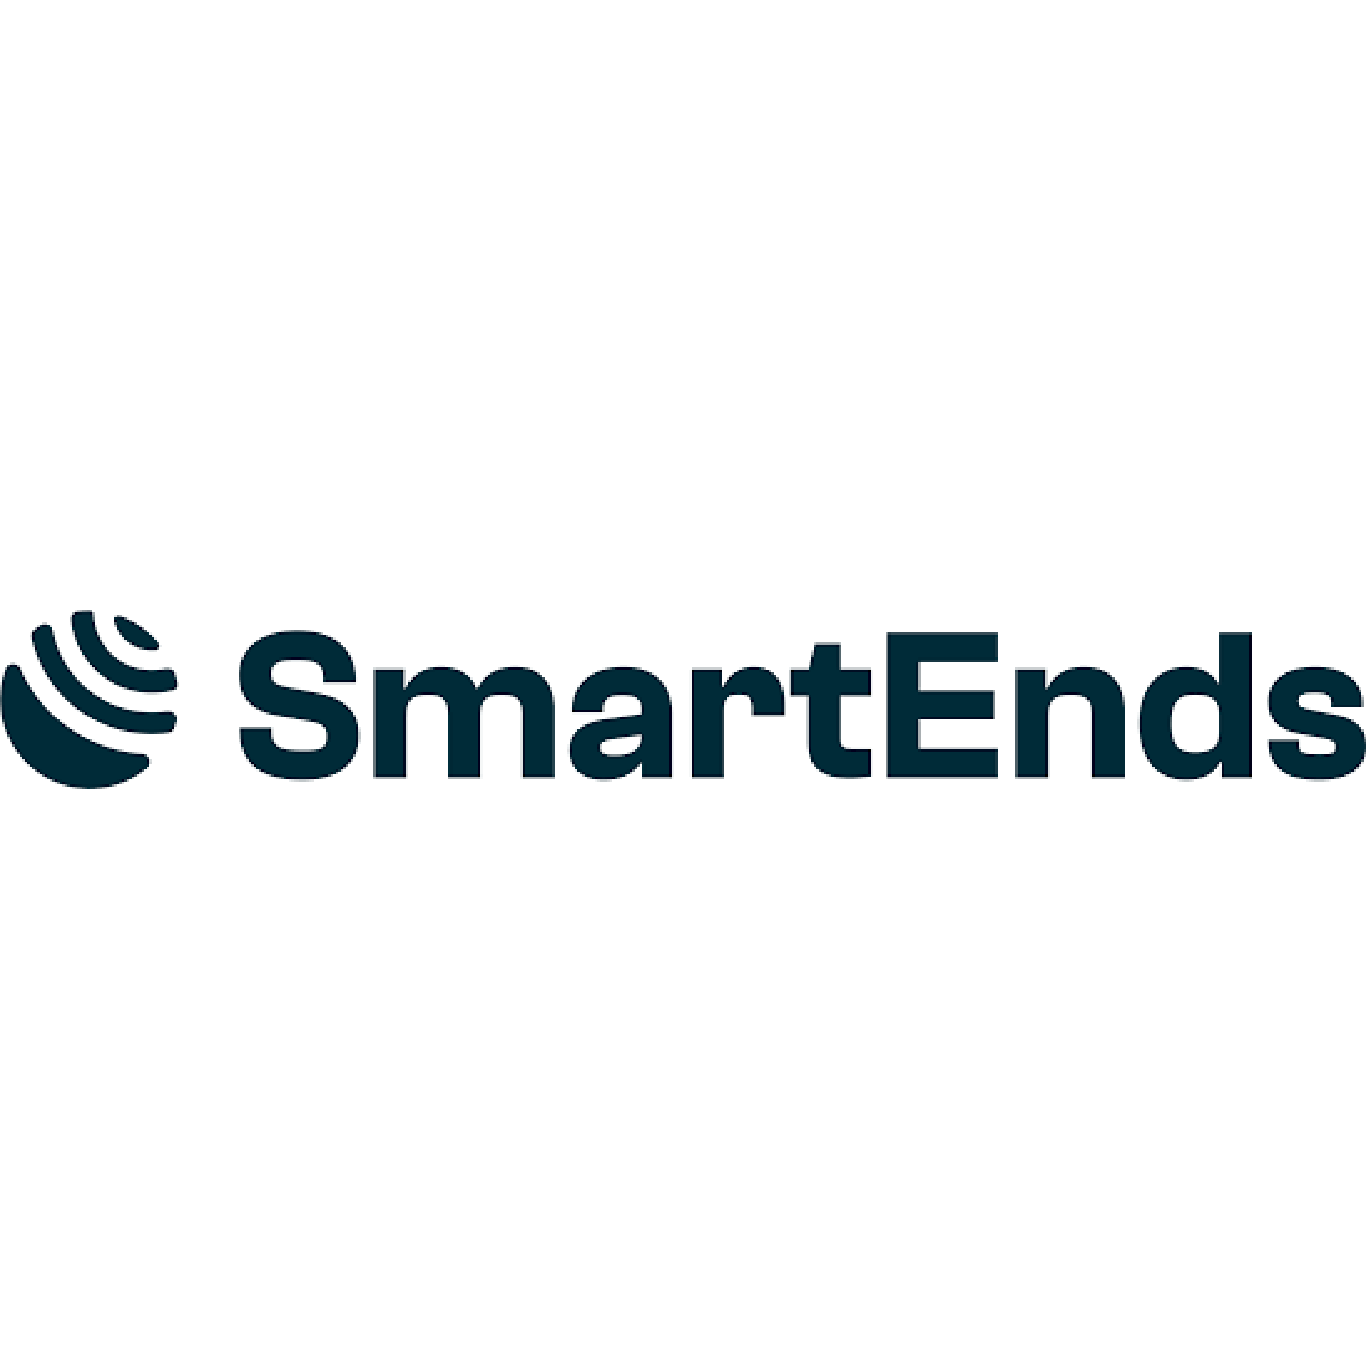 SmartEnd combines IoT software & hardware to tackle challenges in Waste industry